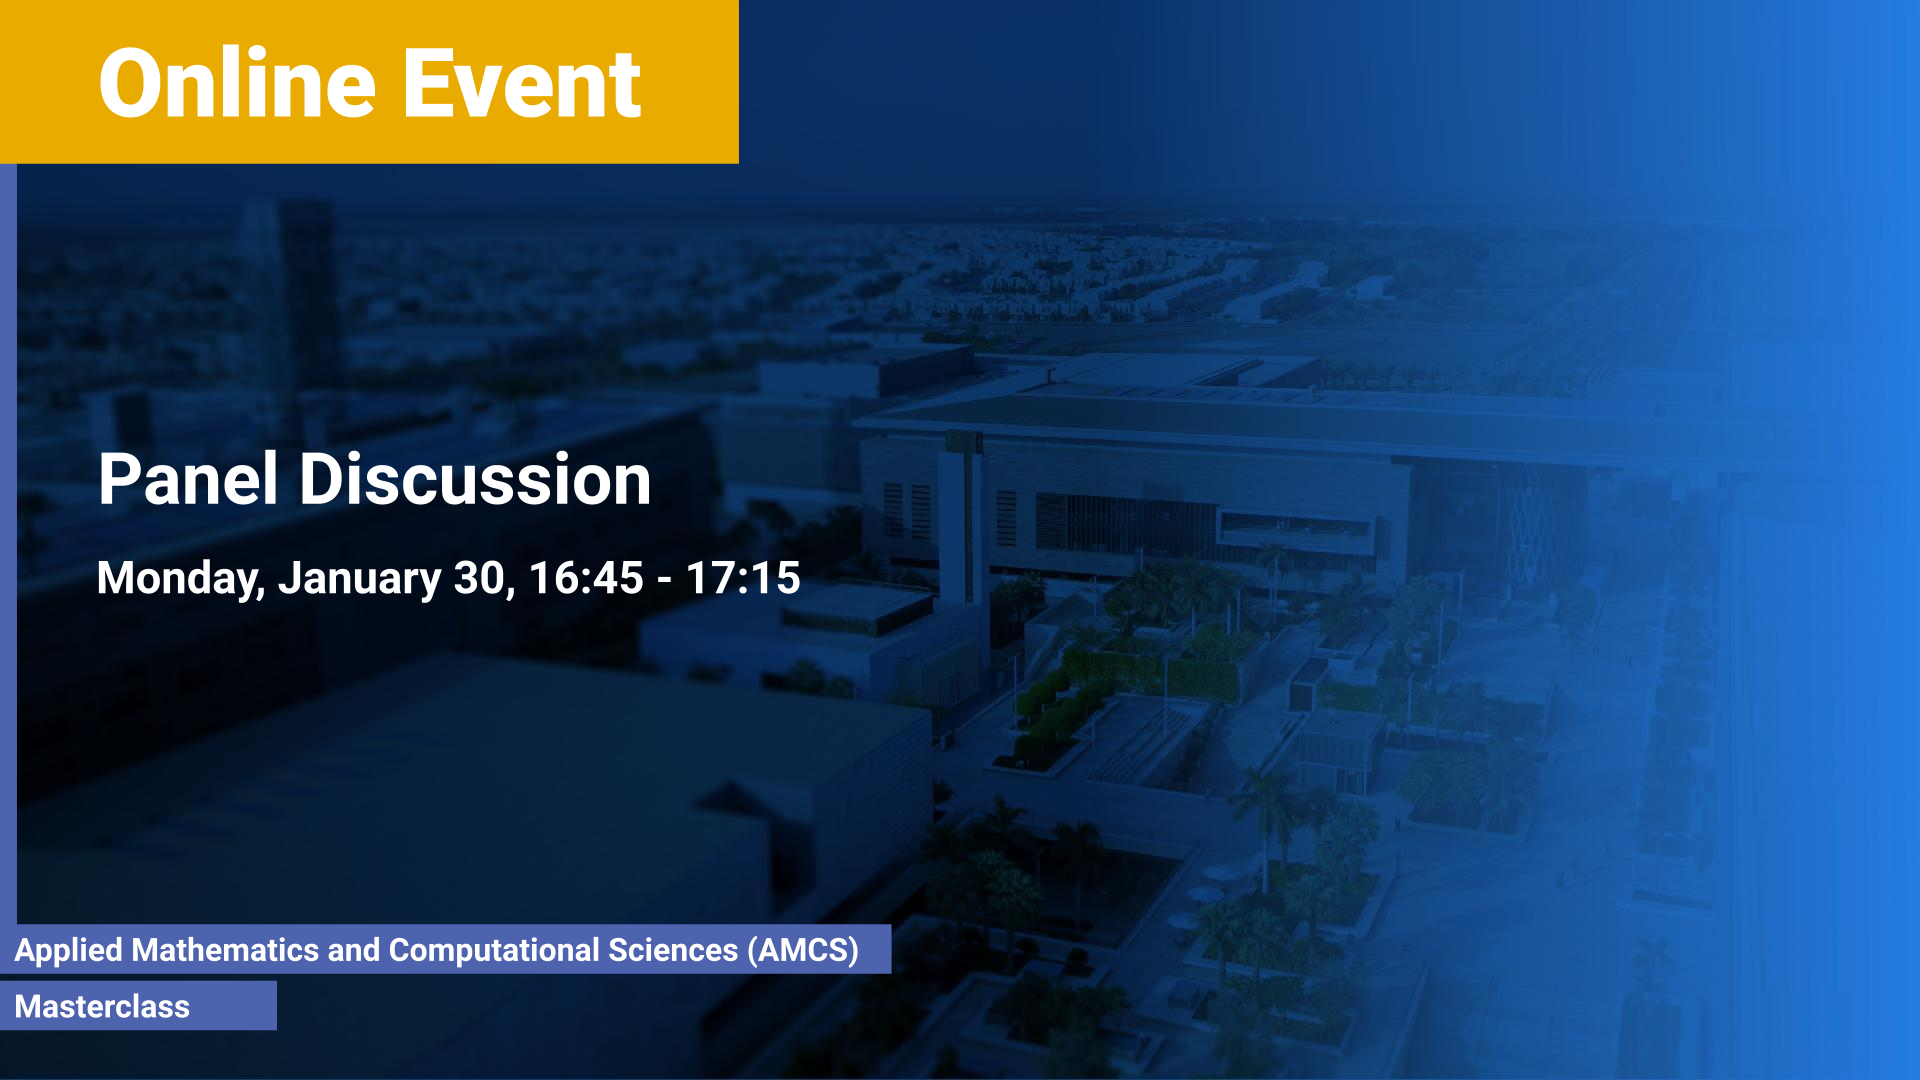 KAUST-CEMSE-AMCS-Masterclass-Applied-Nonlinear-PDEs-Panel-Discussion-1